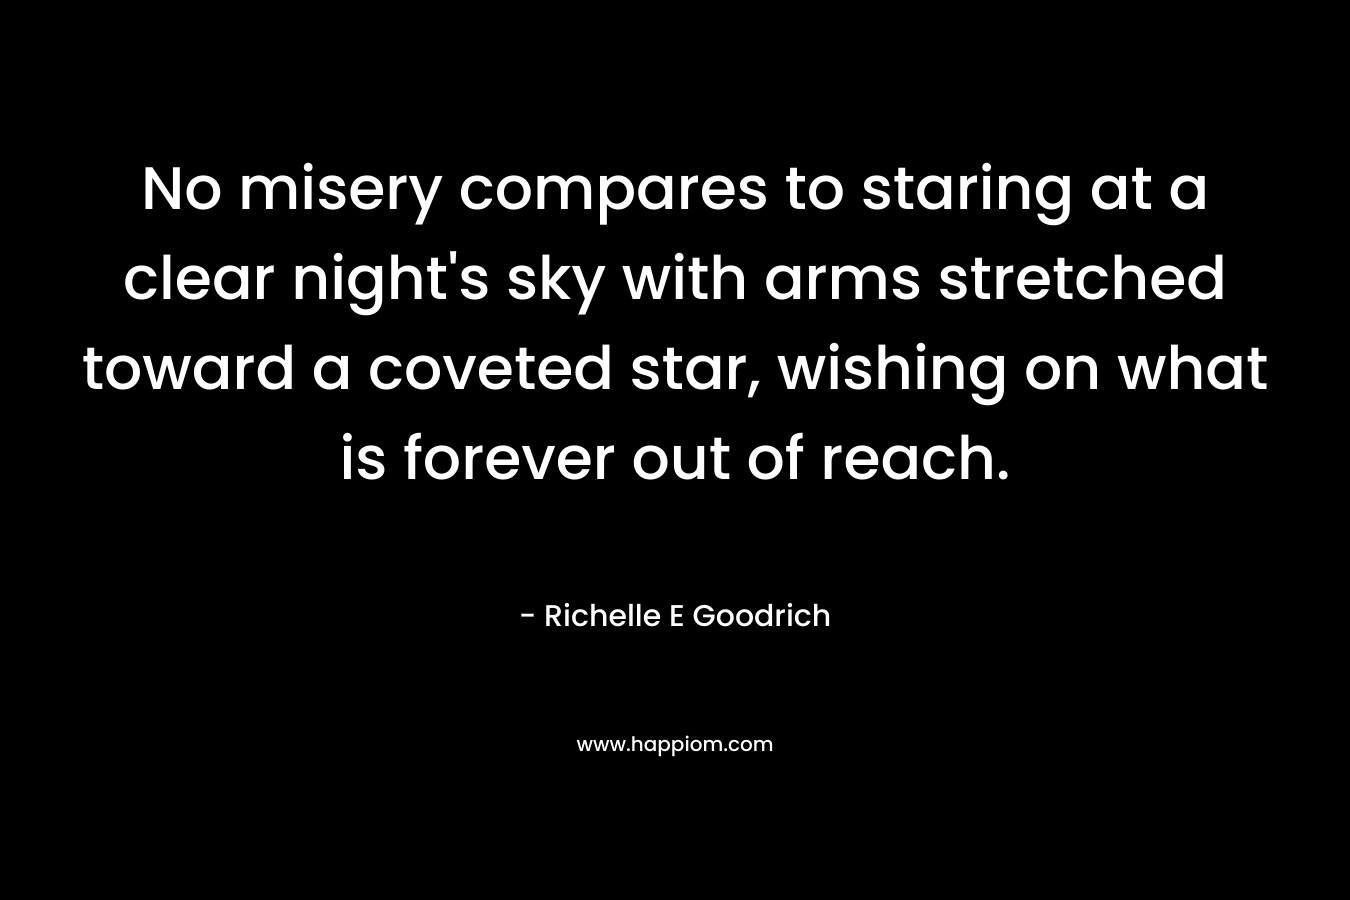 No misery compares to staring at a clear night's sky with arms stretched toward a coveted star, wishing on what is forever out of reach.